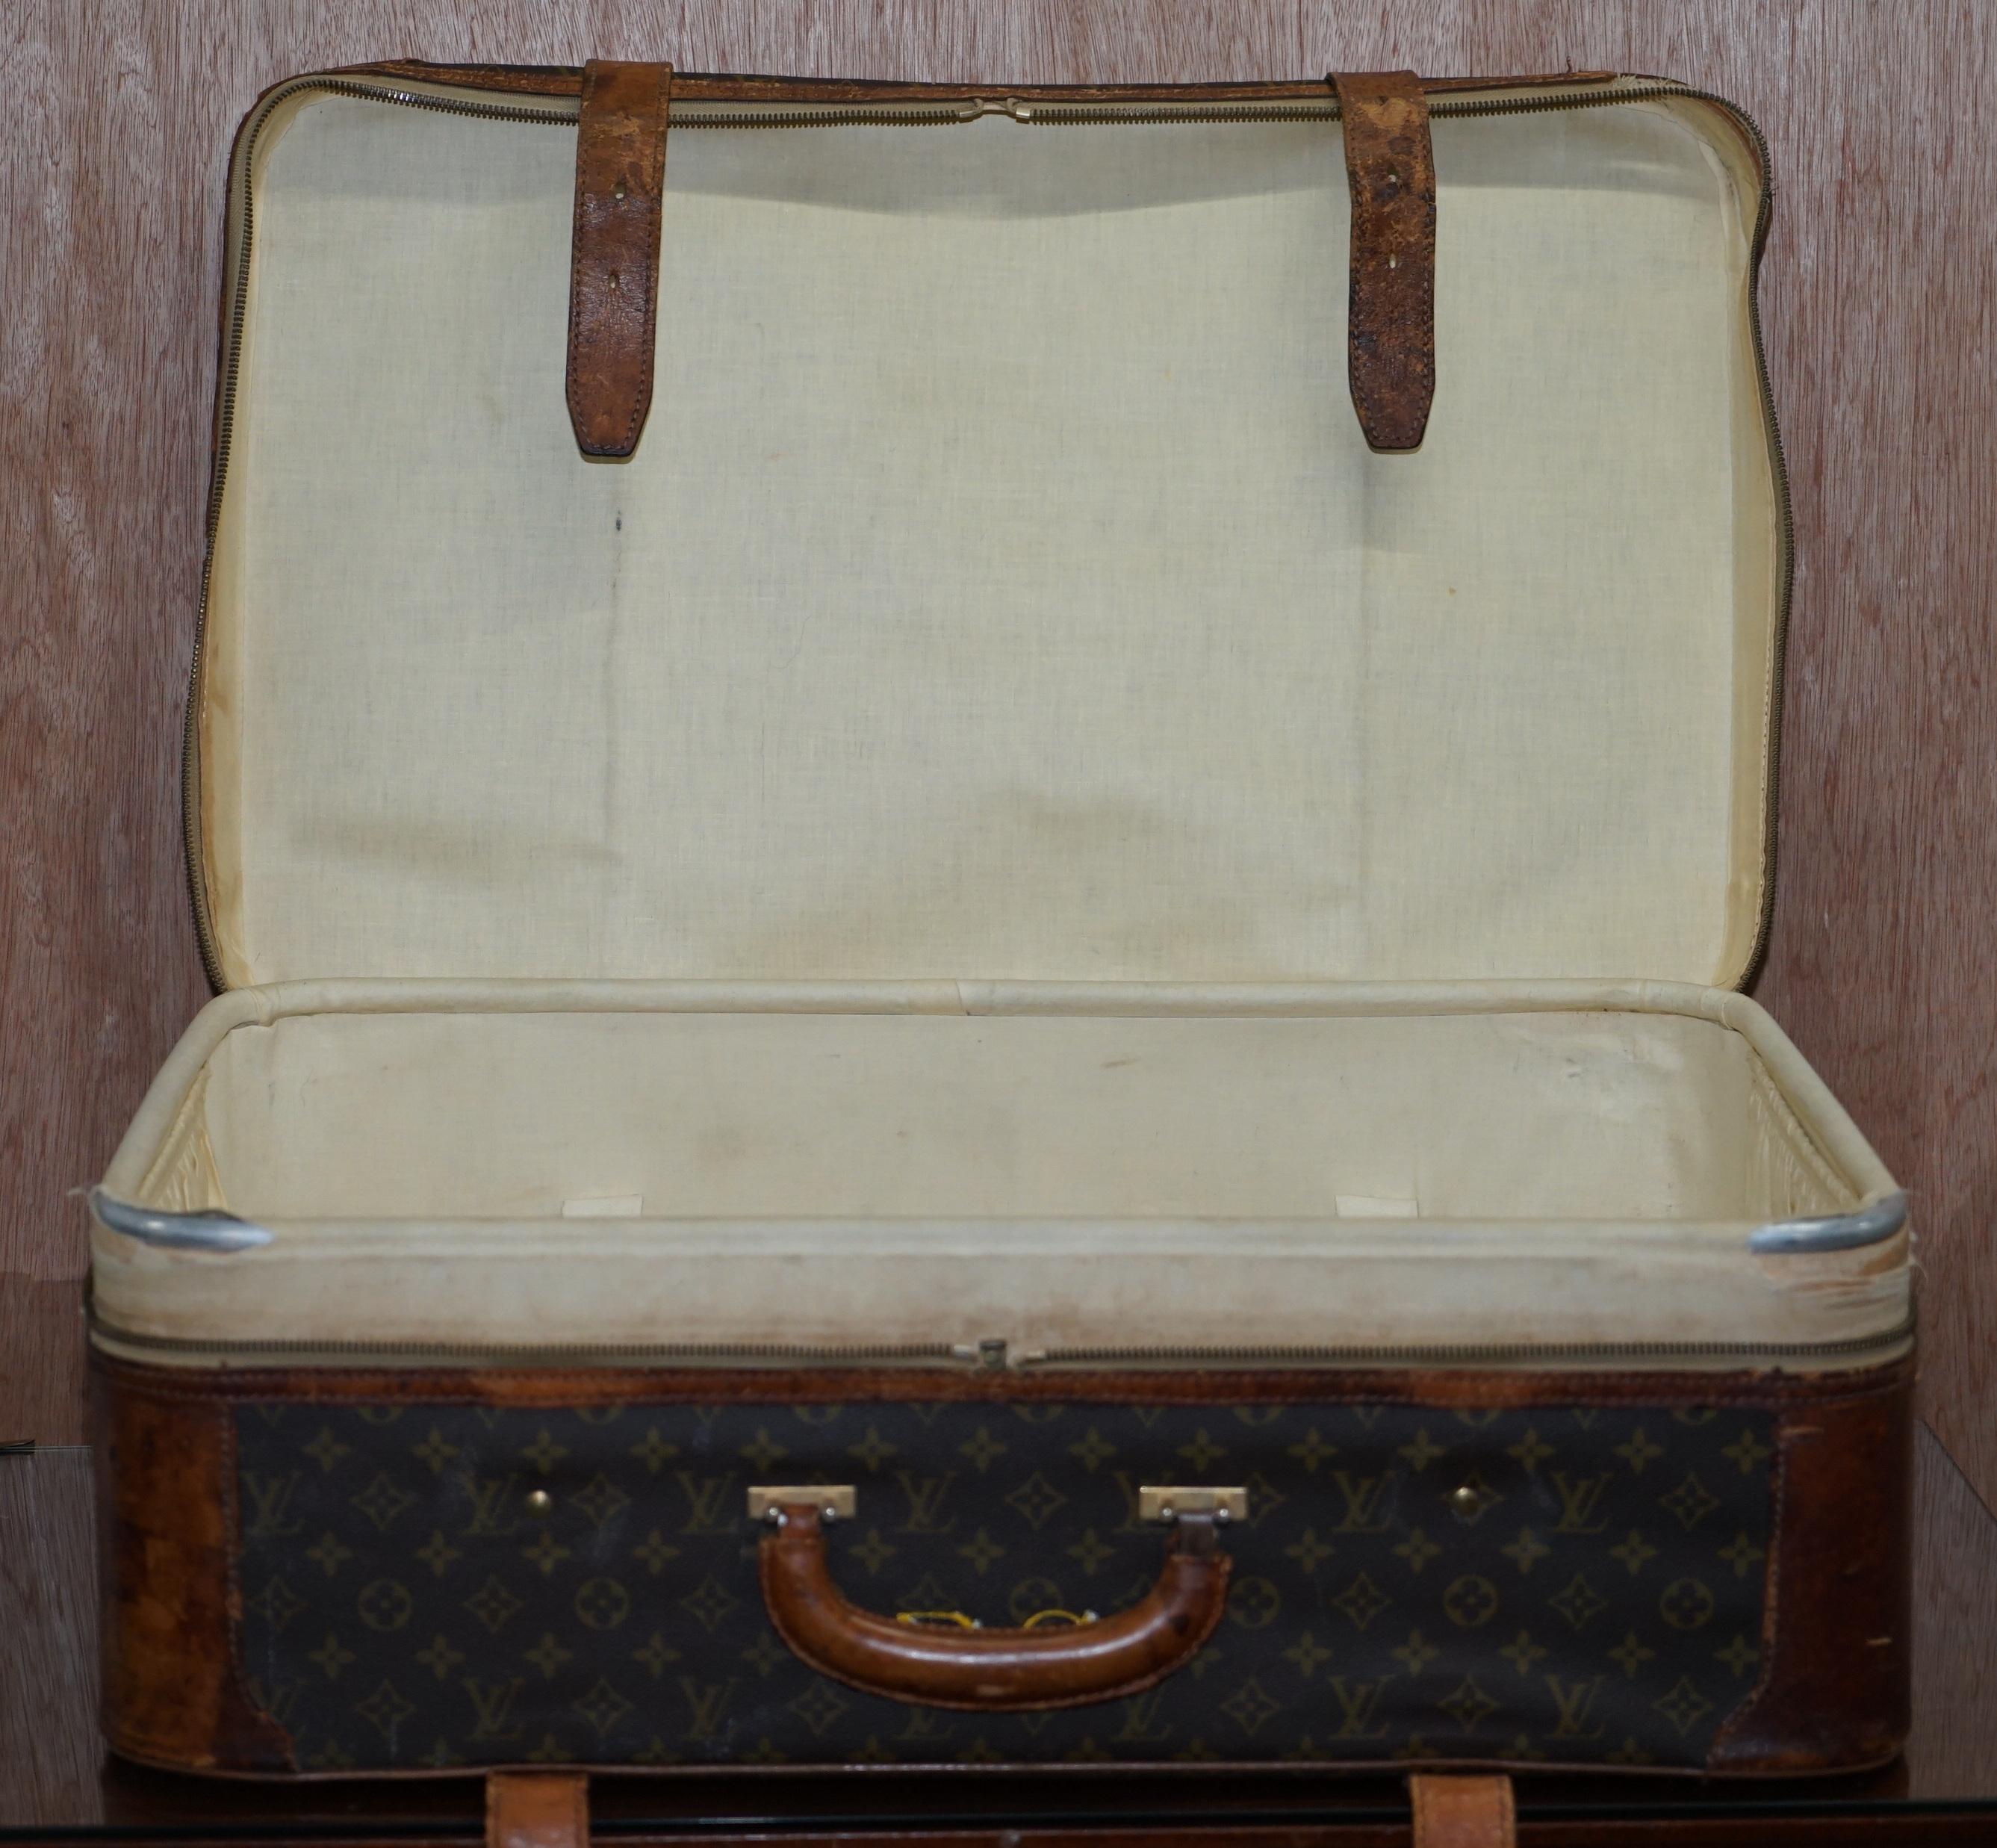 1 of 2 Vintage Brown Leather Louis Vuitton Strapped Bronze Monogram Suitcases 11